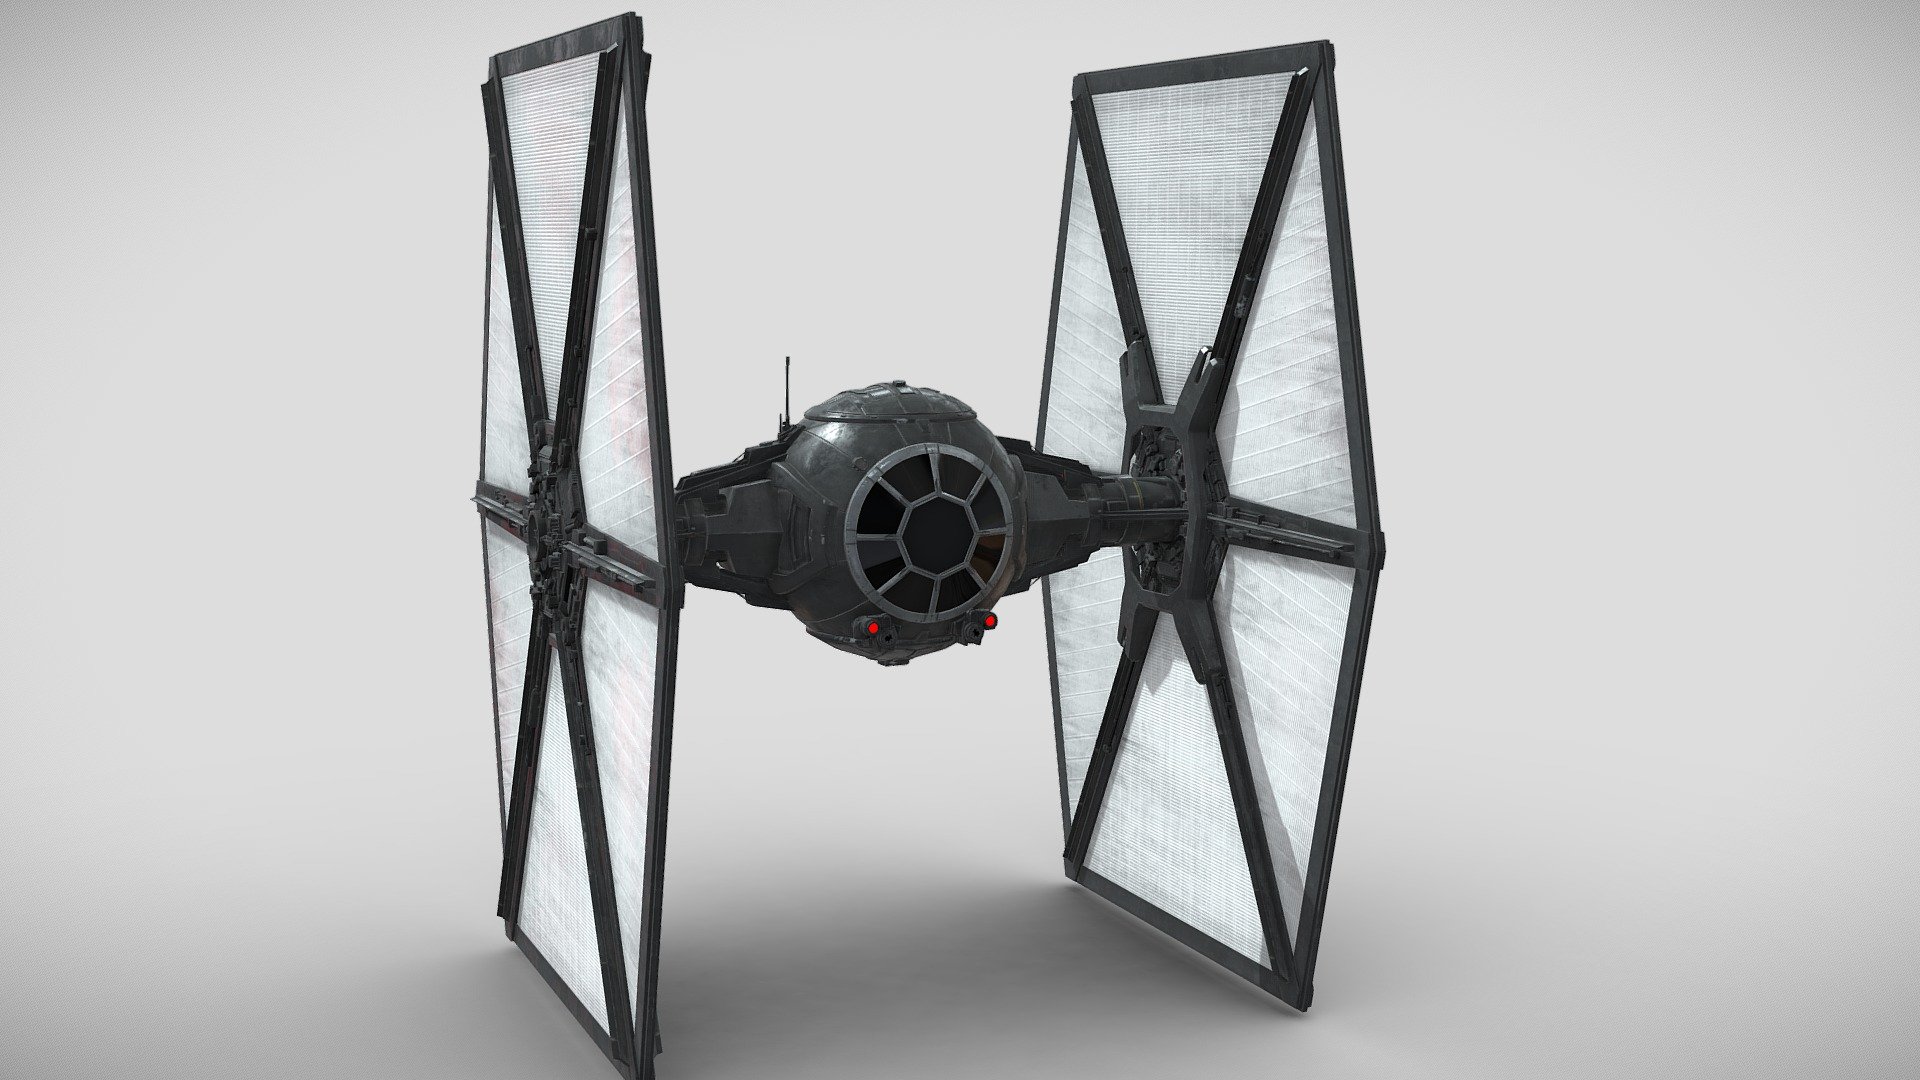 Star Wars First Order Tie Fighter

 The TIE/fo space superiority fighter, commonly known as the First Order TIE fighter, was a starfighter used by the First Order. A product of Sienar-Jaemus Fleet Systems, the TIE/fo carried the appearance of its predecessor, the TIE/ln space superiority starfighter, though it featured internal advancements that provided it with greater defensive capabilities 3d model